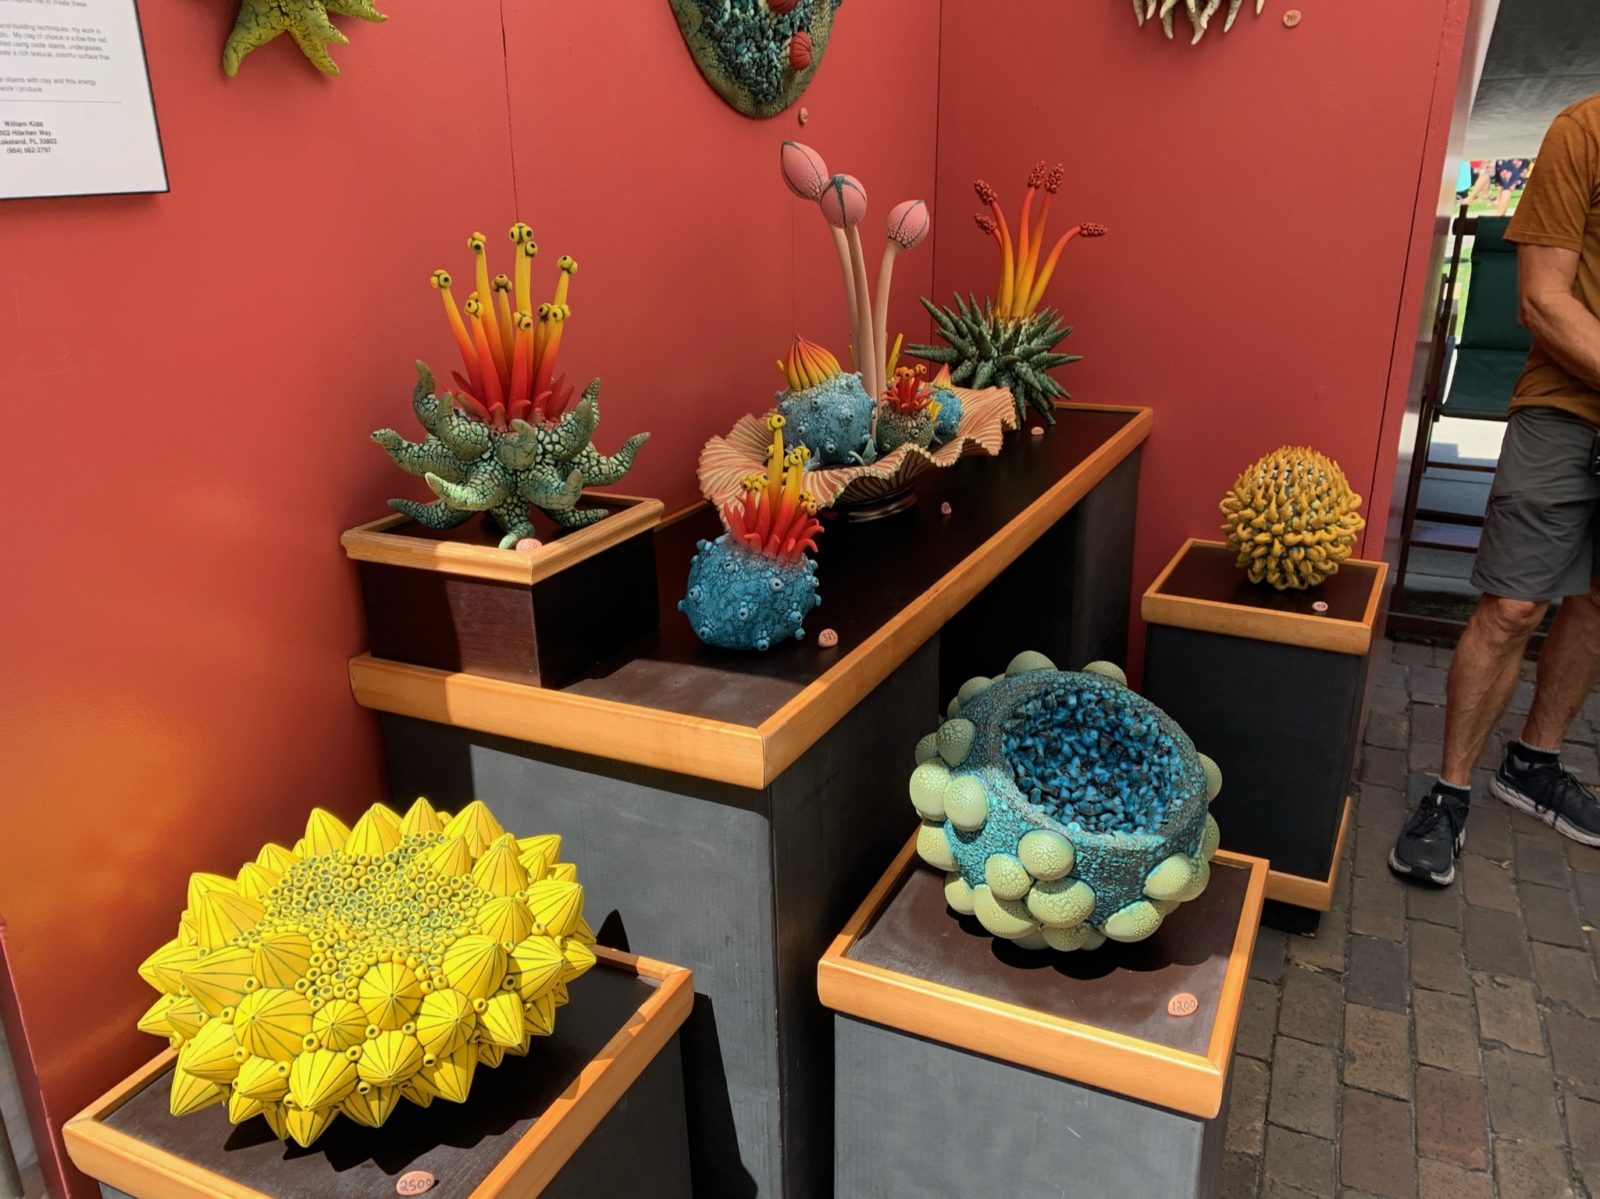 Red walls are the background for various clay sculptures made out of bright colors, mirroring cacti and other plants.